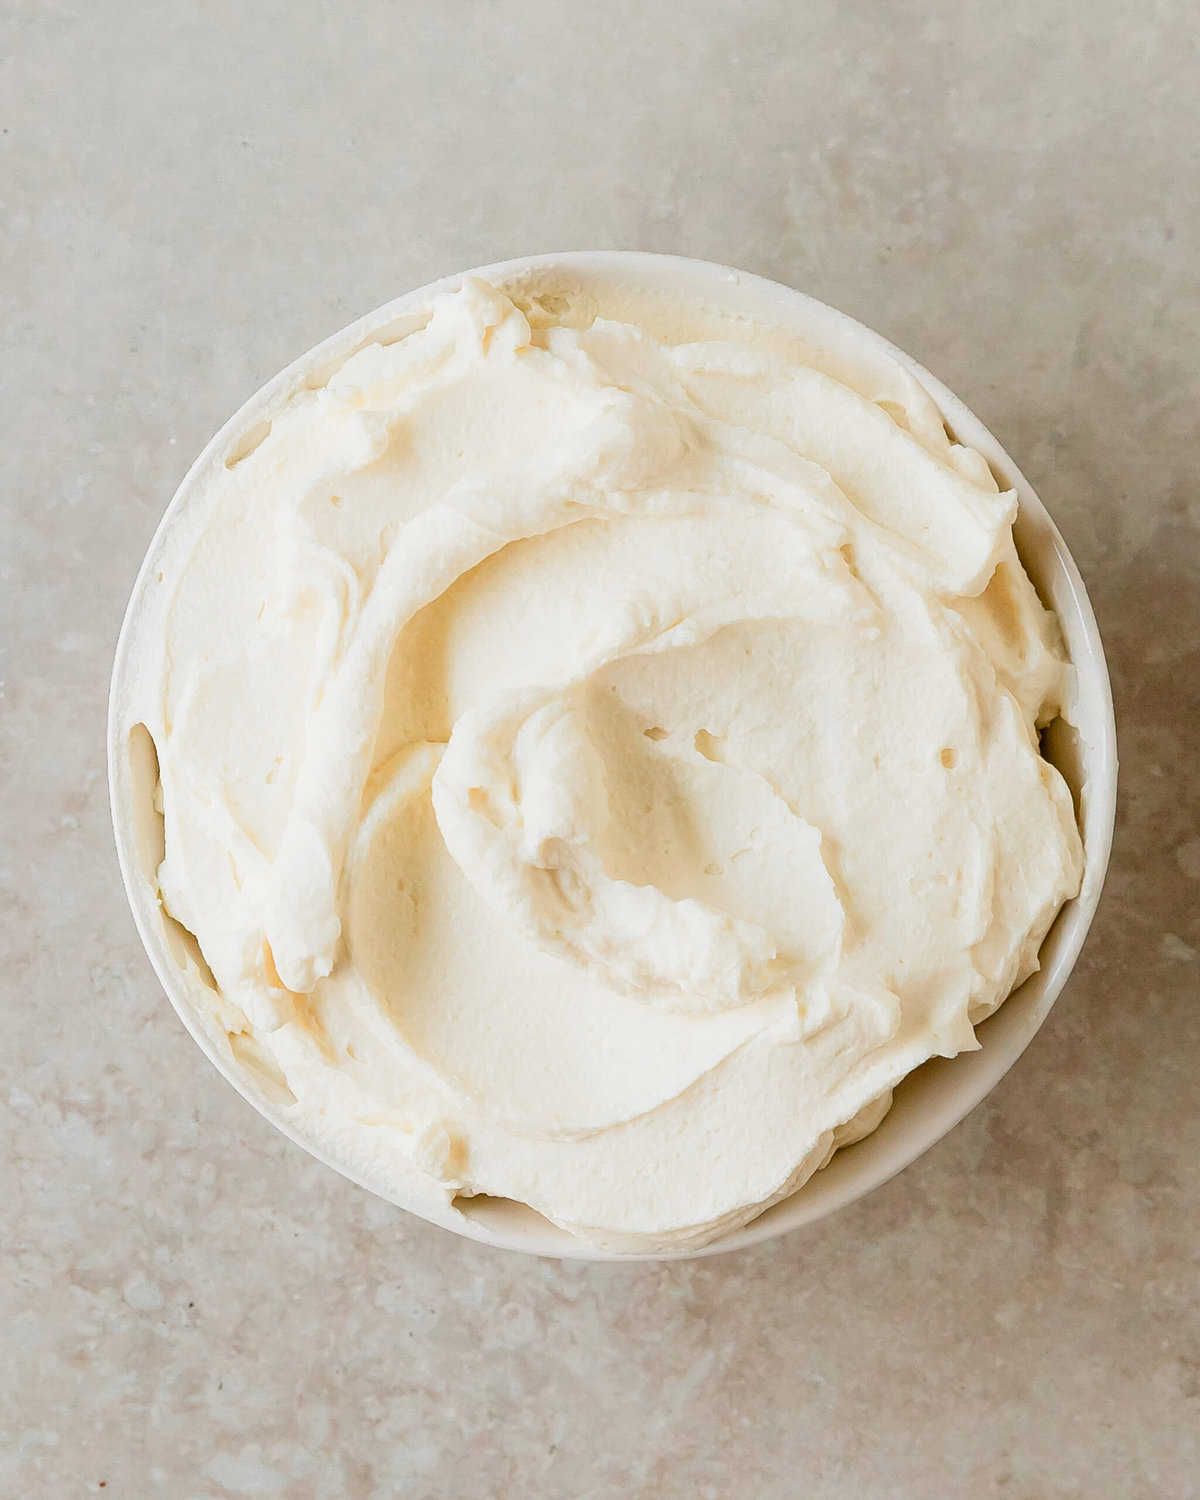 Mascarpone frosting is a decadent, creamy and lusciously silky smooth frosting that’s perfect for topping cakes, cupcakes, brownies and cookies.  This mascarpone whipped cream frosting is made from 4 simple ingredients and is incredibly easy to make. Reach for this mascarpone icing the next time you need an incredibly delicious, but not too sweet frosting recipe. 